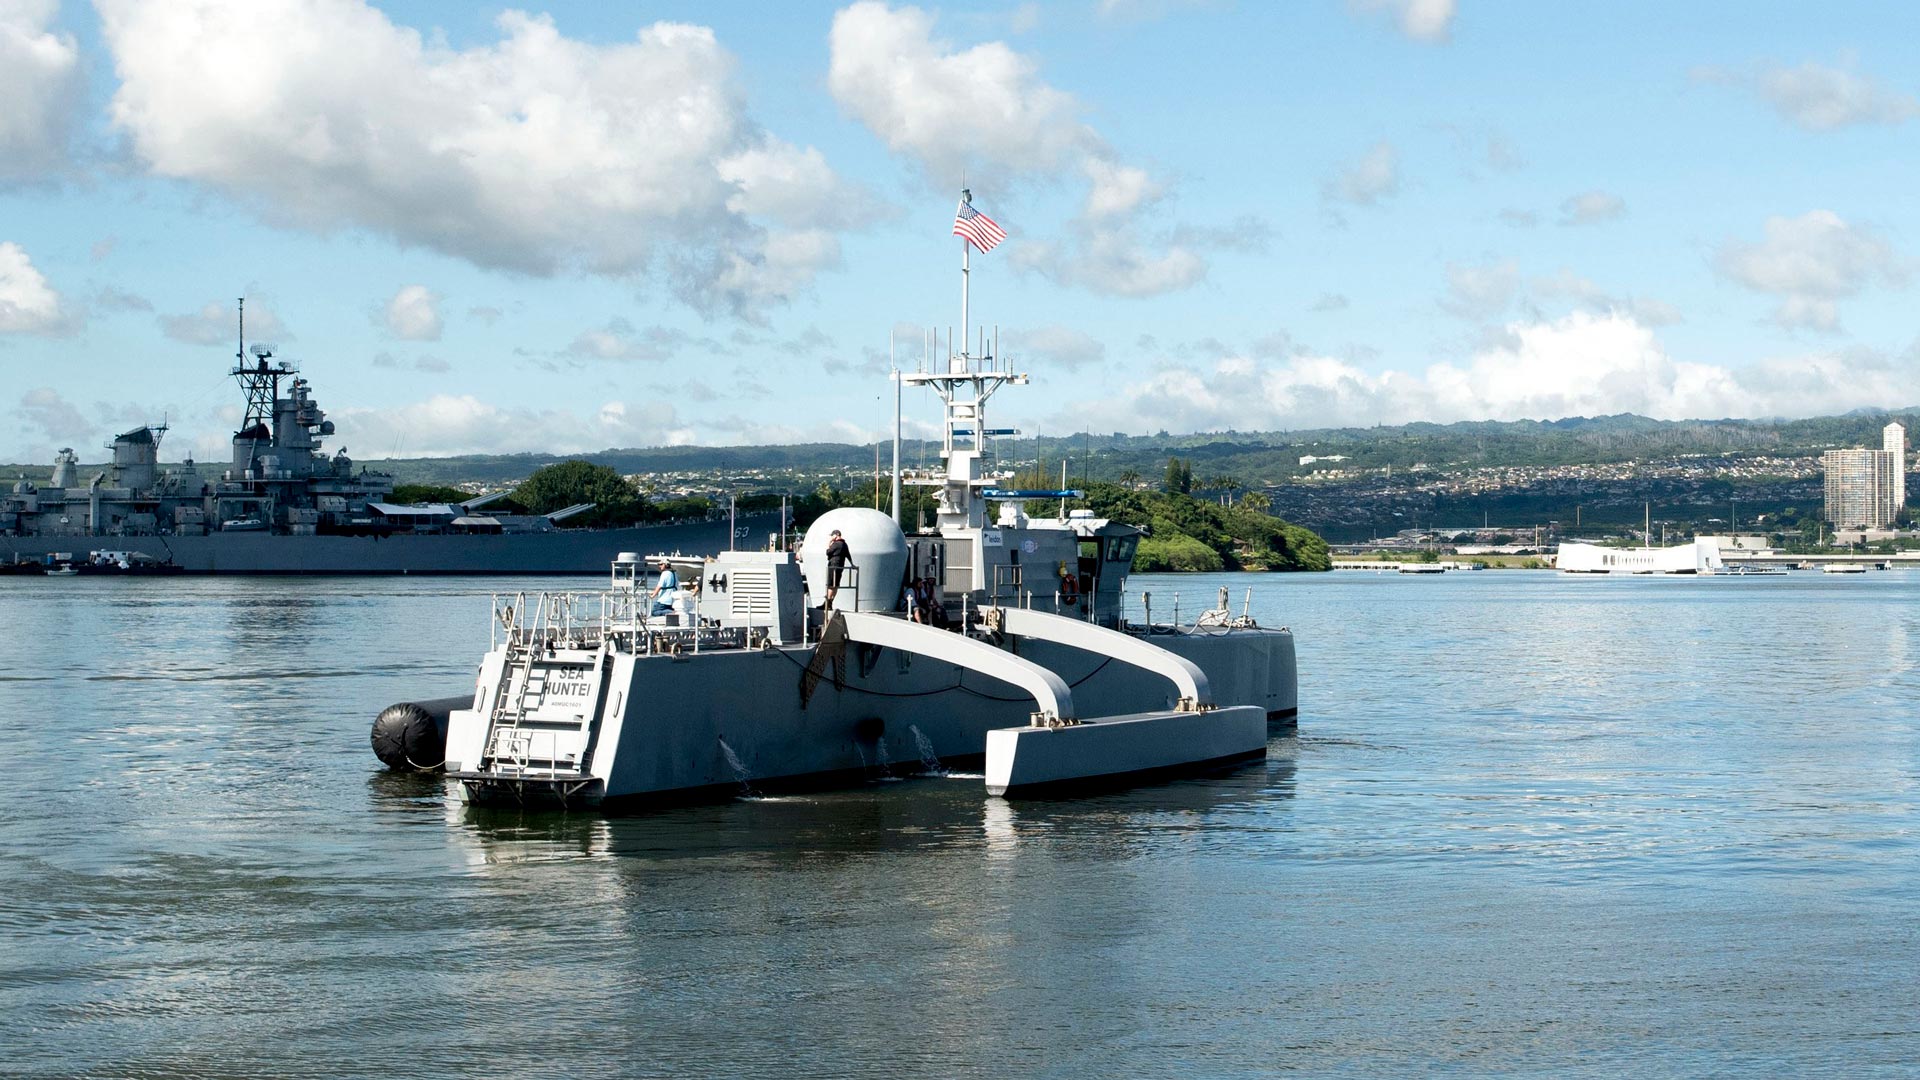 Medium Displacement Unmanned Surface Vehicle (MDUSV) prototype Sea Hunter pulls into Joint Base Pearl Harbor-Hickam, Hawaii on Oct. 31, 2018. US Navy Photo